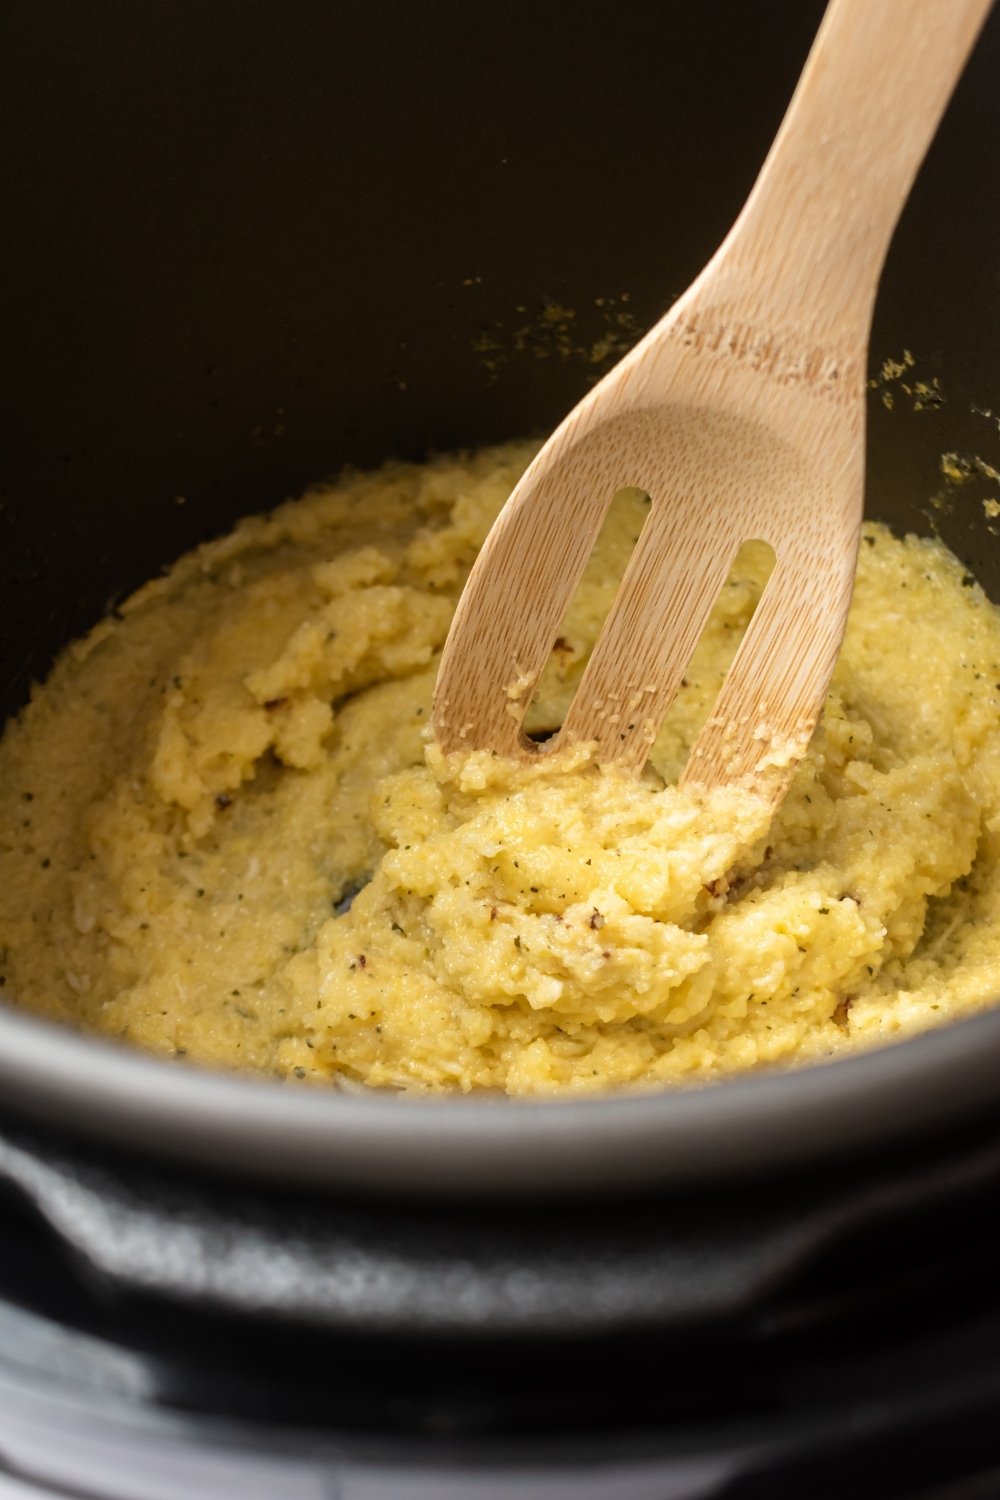 Polenta cooking in an instant pot with a wooden spoon submerged in the polenta.